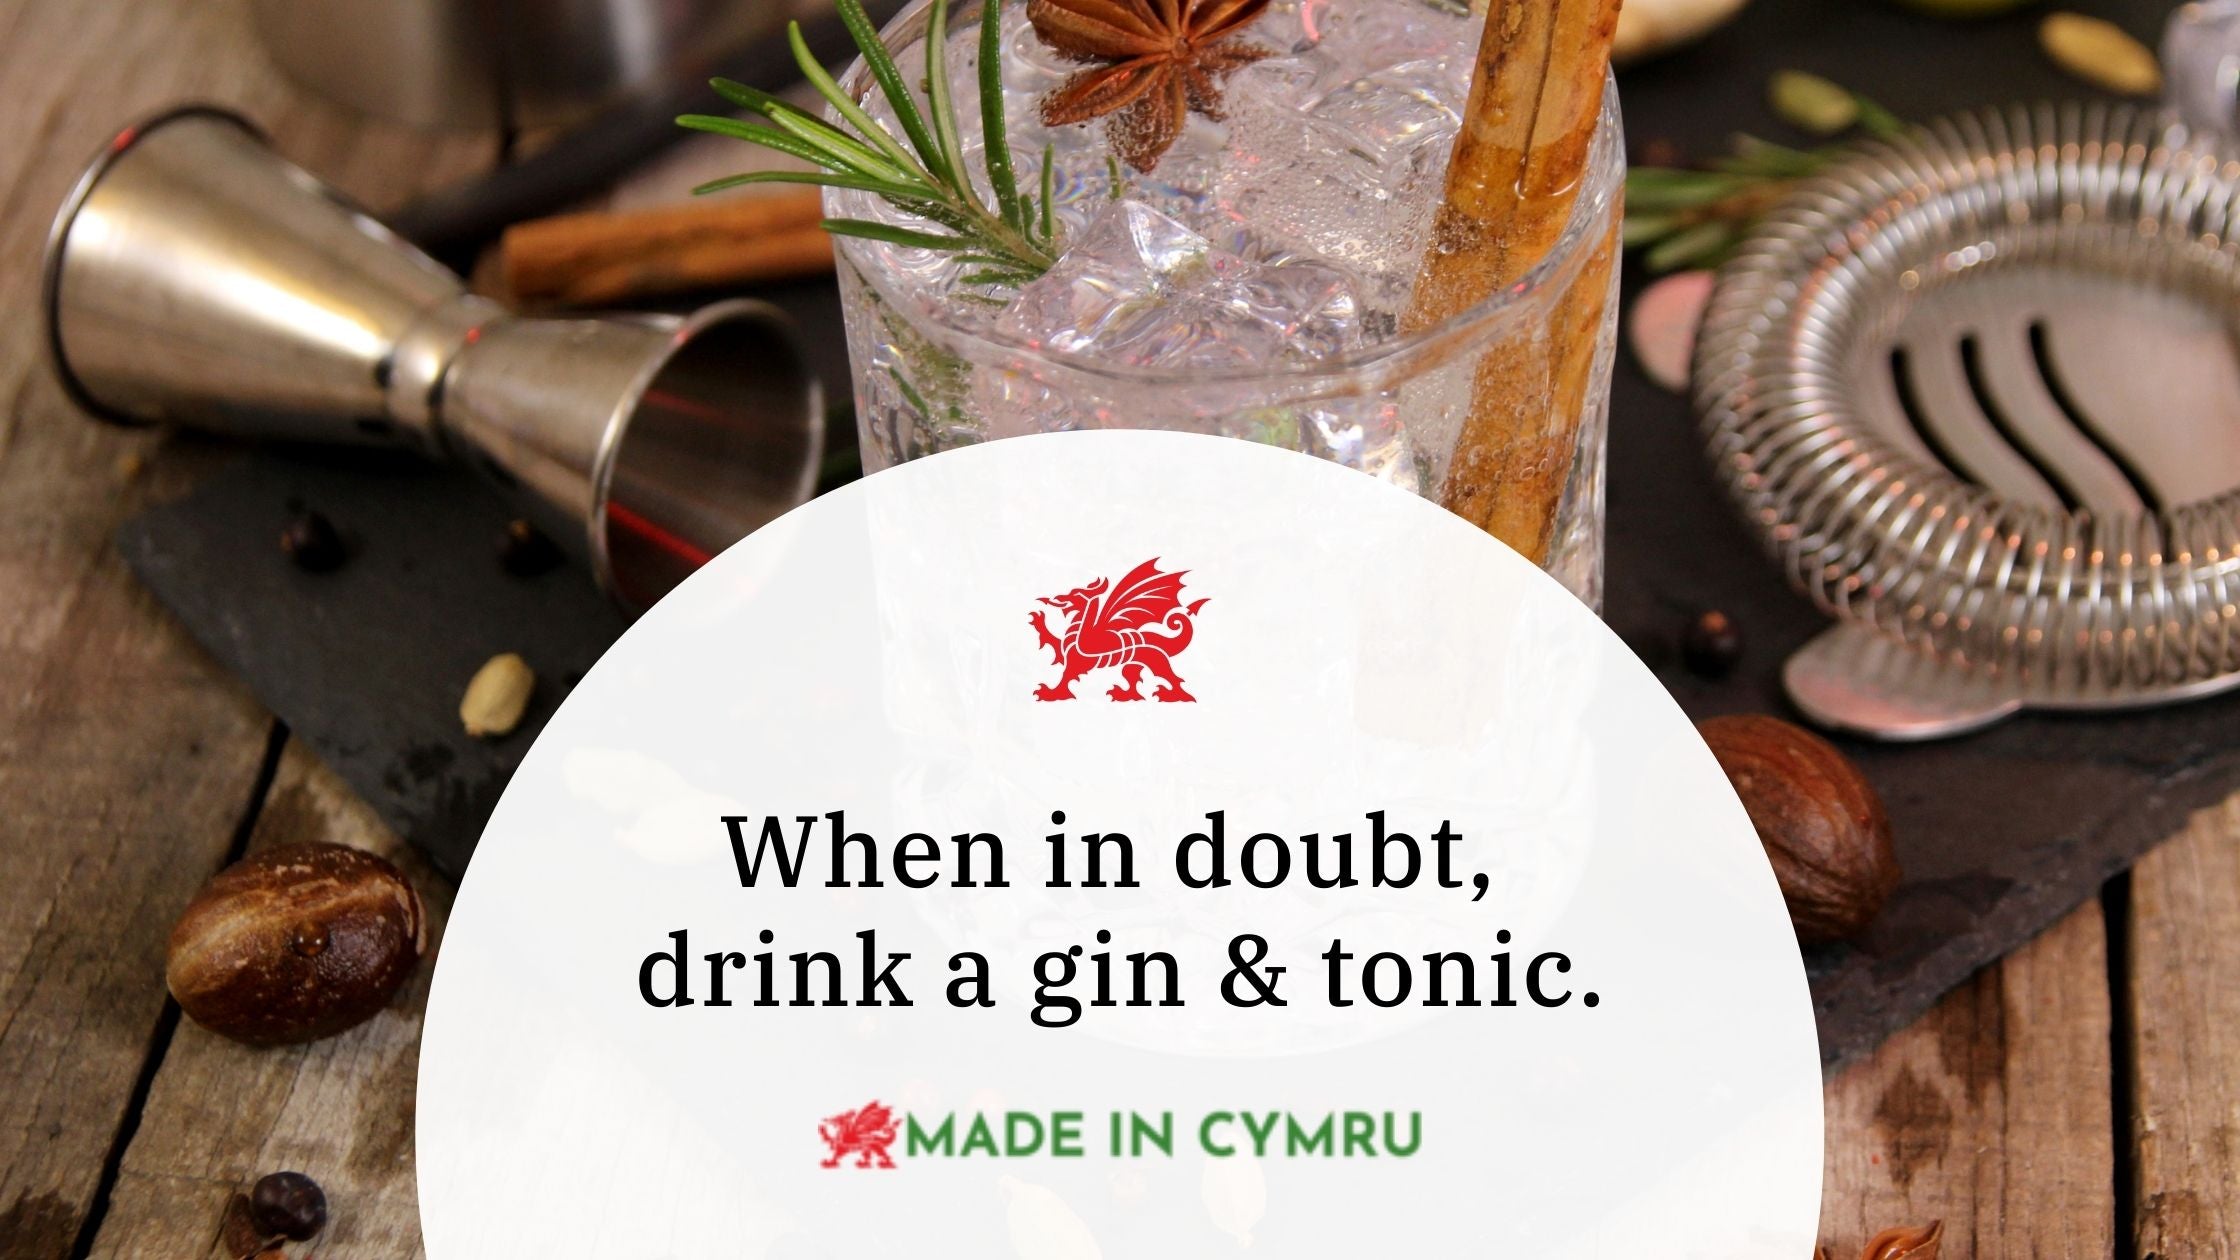 What is Welsh craft gin?